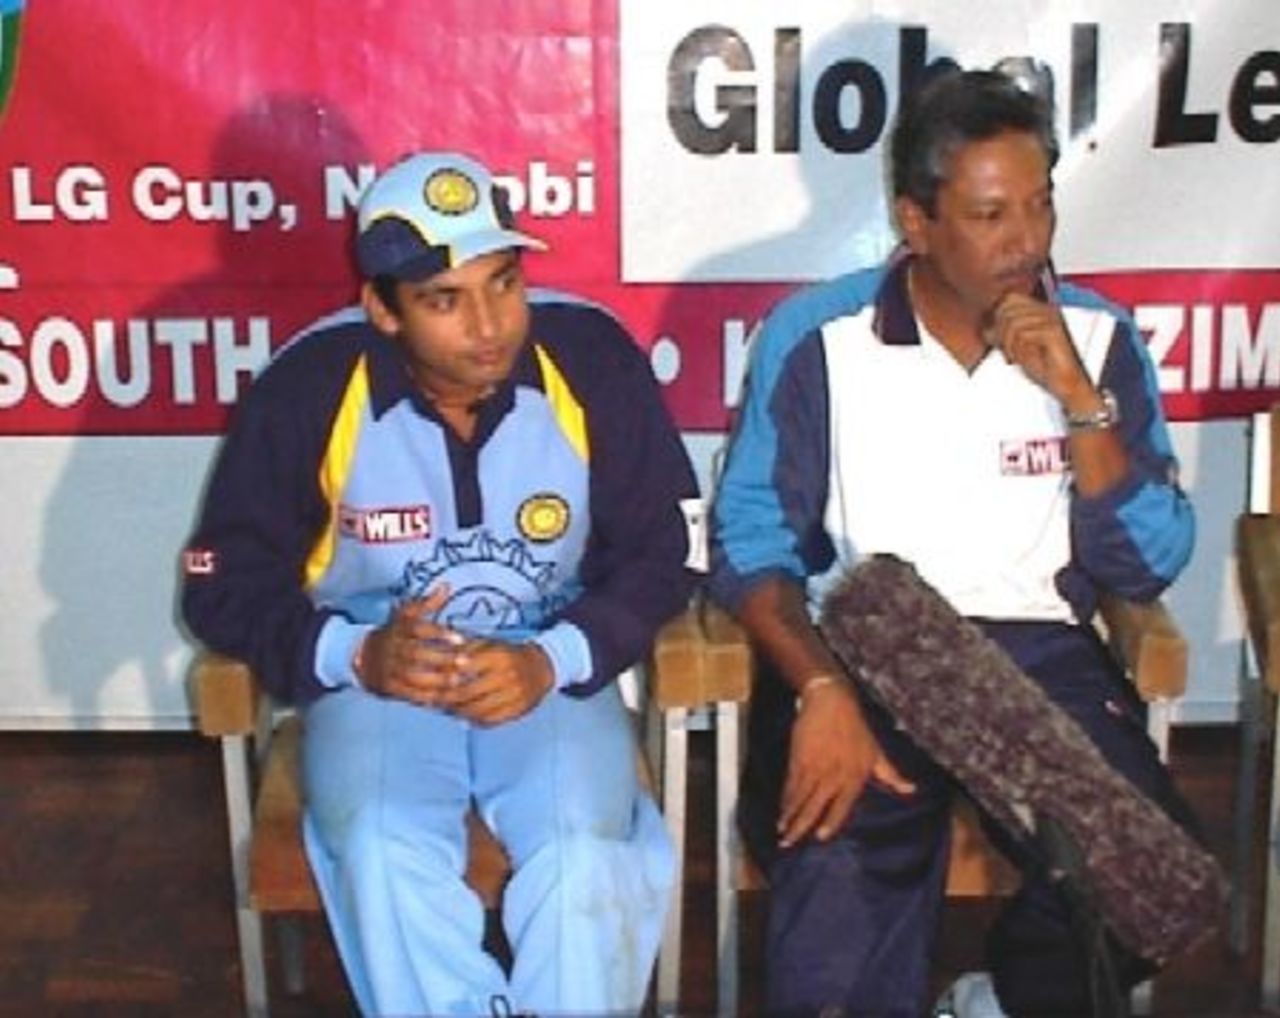 Indian Captain Ajay Jadeja with outgoing coach Gaekwad comment on their victory over South Africa in their first match of the 1999 LG Cup in Nairobi, Kenya